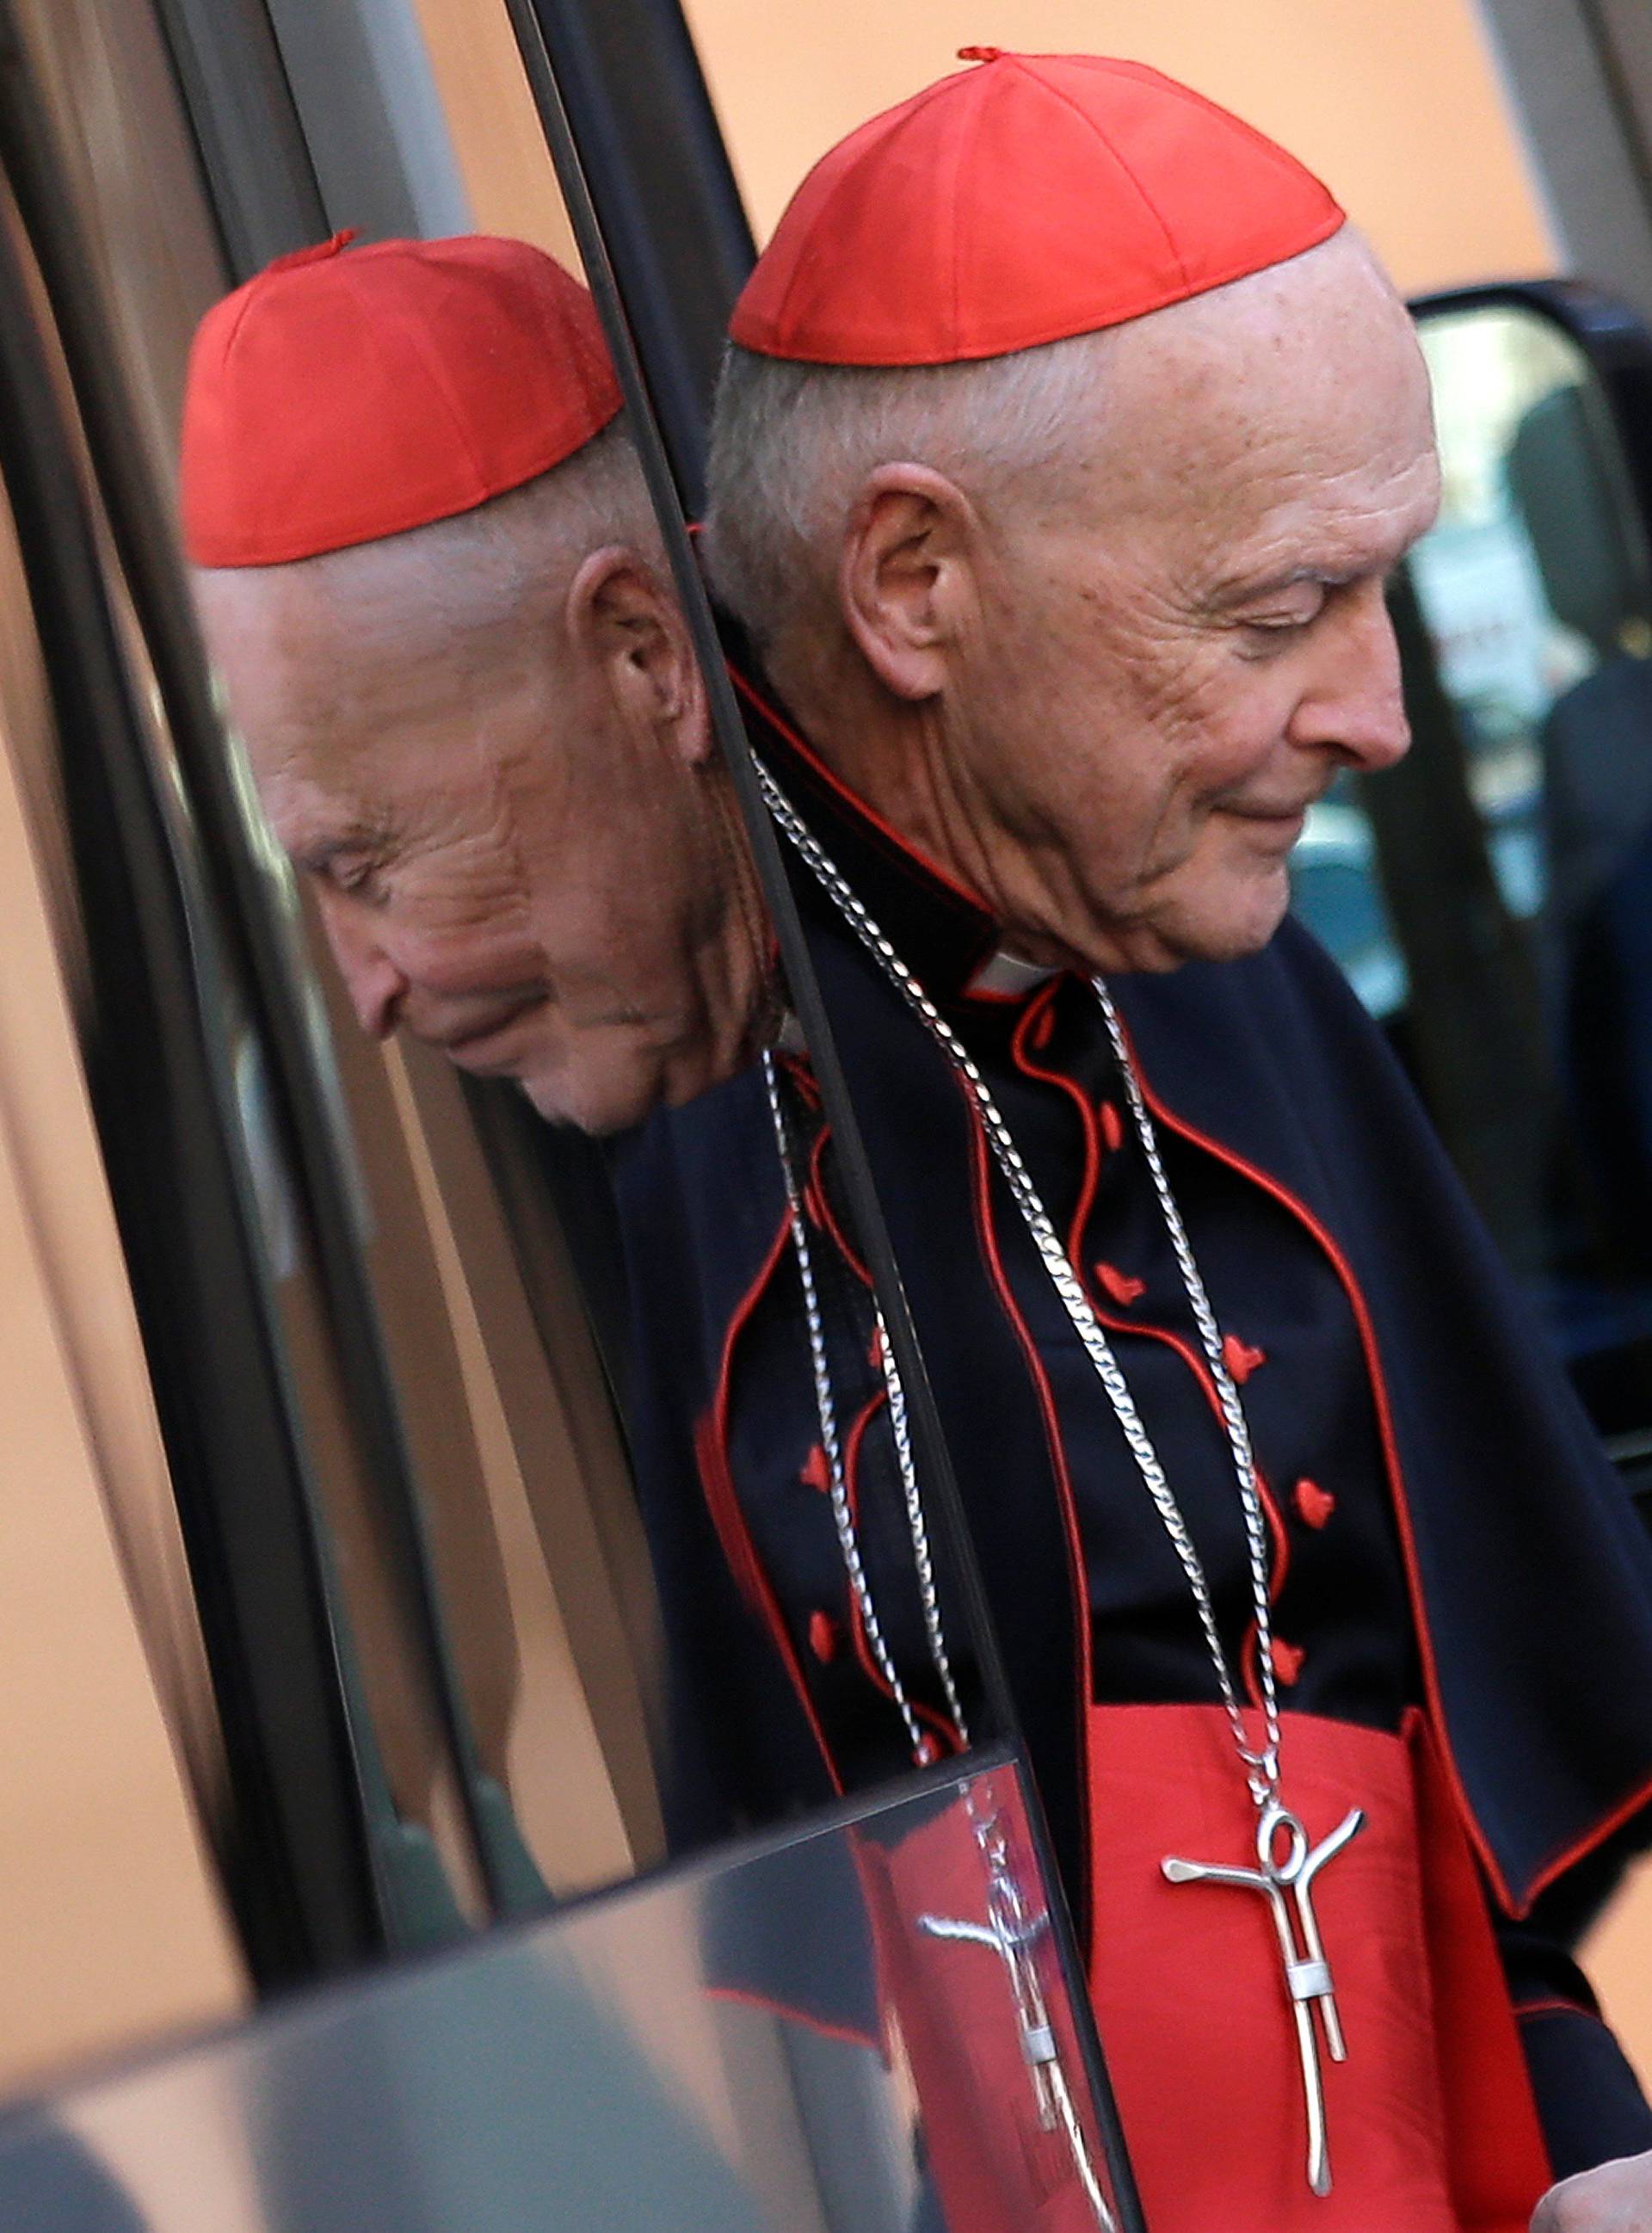 FILE PHOTO: U.S. Cardinal McCarrick arrives for a meeting at the Synod Hall in the Vatican